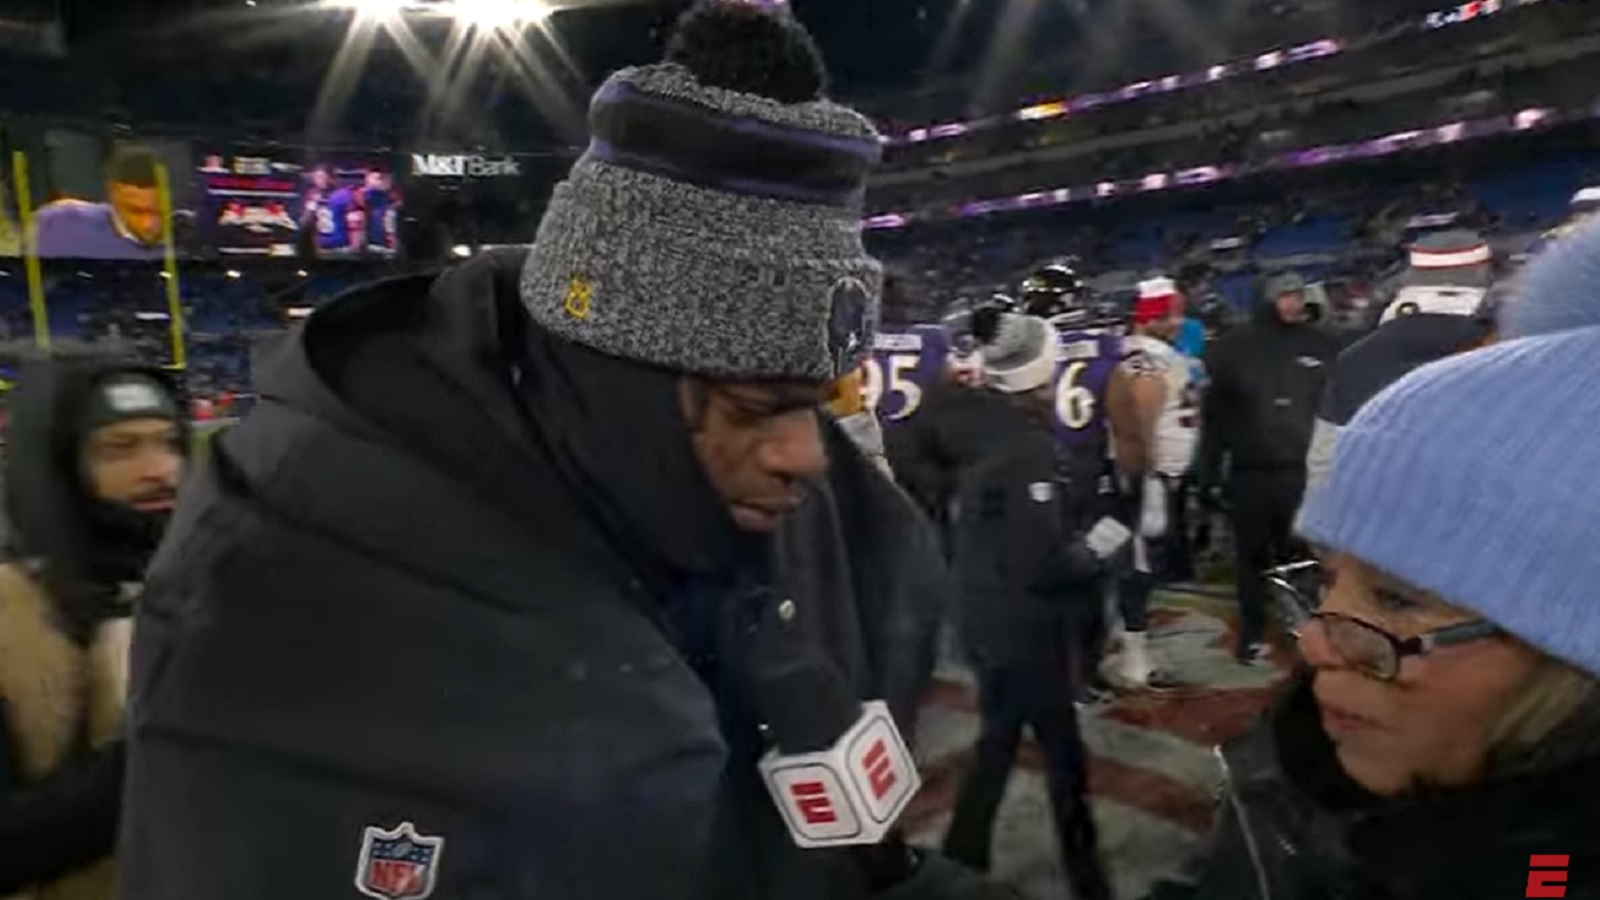 Ravens fanbase braves extremely cold weather to cheer on Lamar Jackson and the team…..